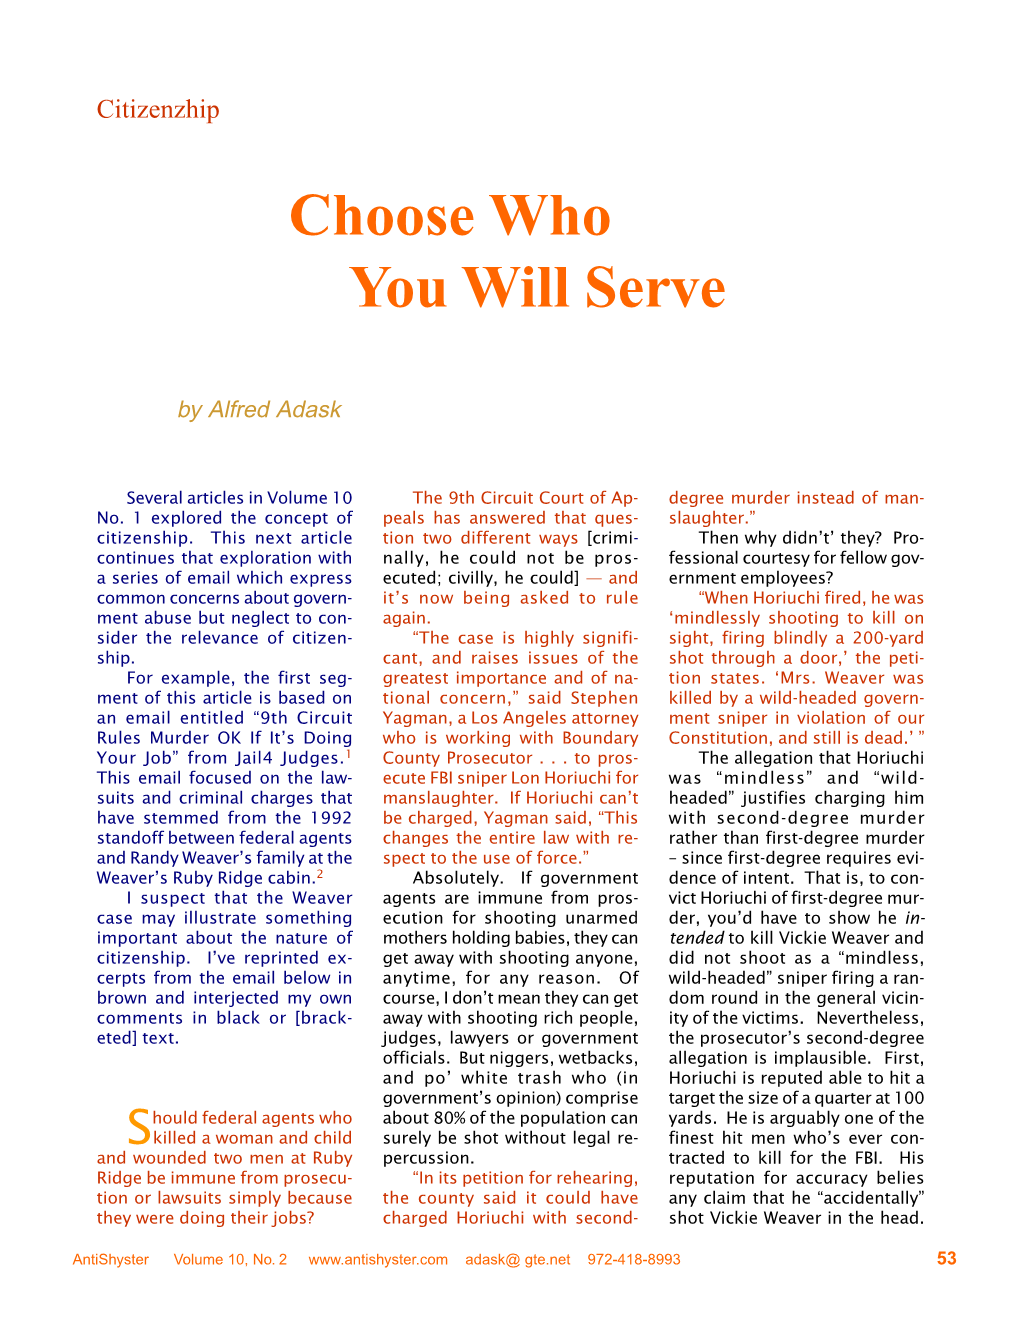 Choose Who You Will Serve